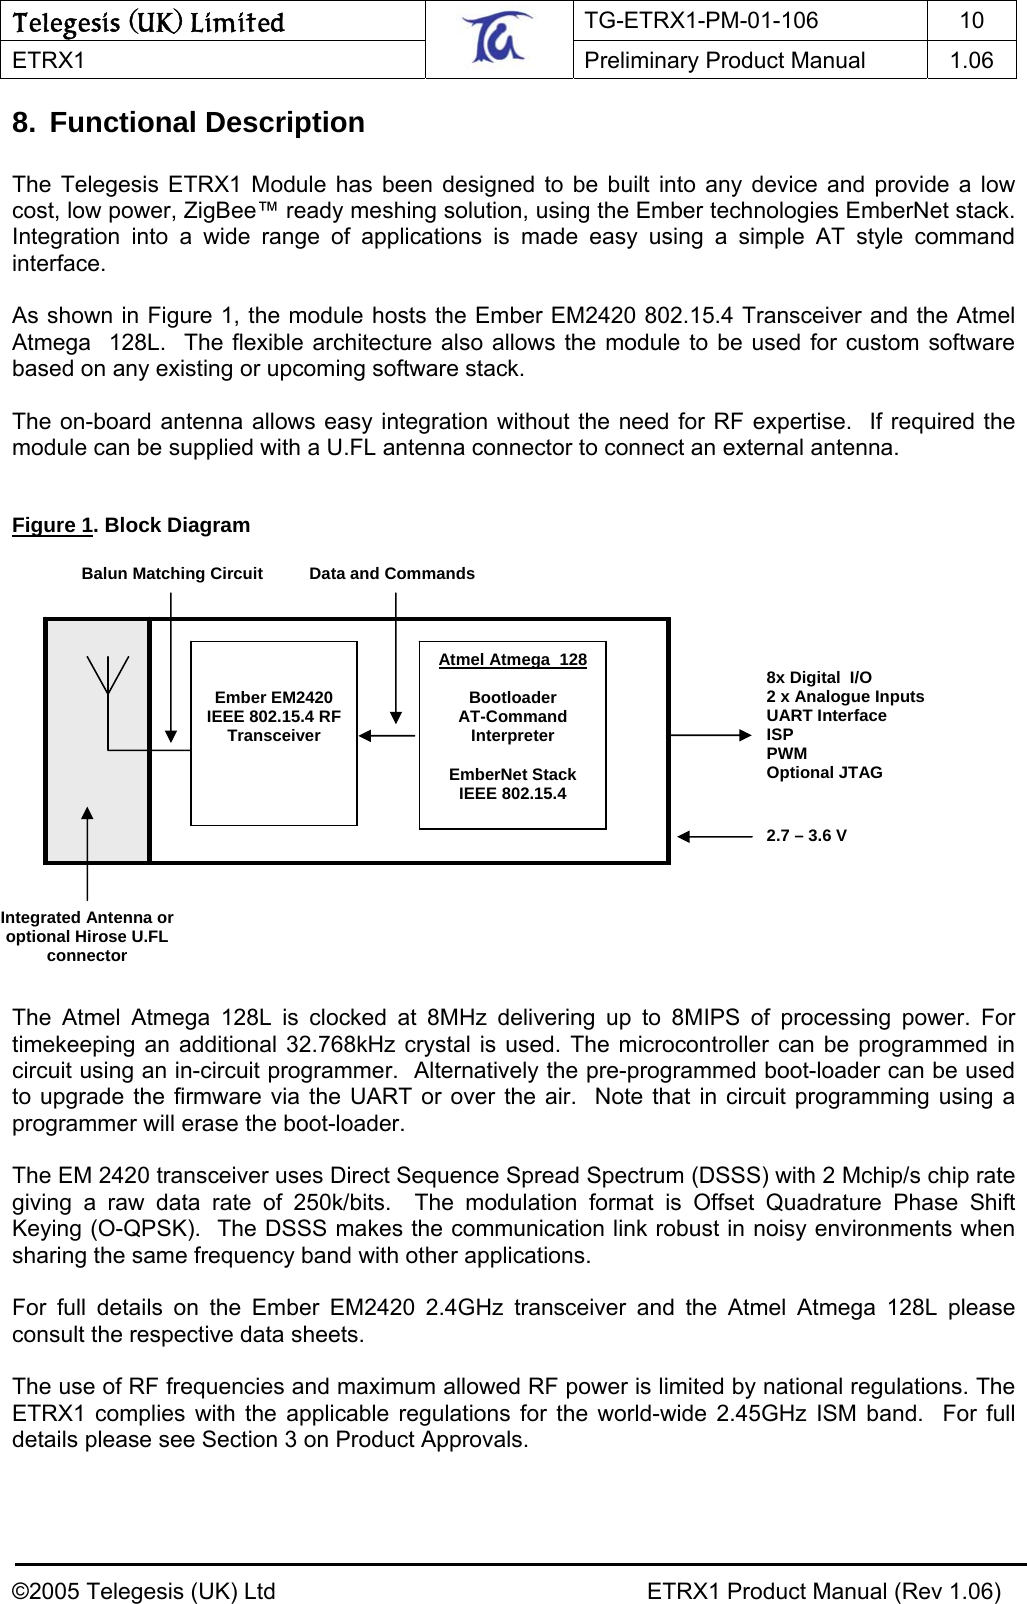 Telegesis (UK) Limited TG-ETRX1-PM-01-106 10  ETRX1    Preliminary Product Manual  1.06   8. Functional Description  The Telegesis ETRX1 Module has been designed to be built into any device and provide a low cost, low power, ZigBee™ ready meshing solution, using the Ember technologies EmberNet stack.  Integration into a wide range of applications is made easy using a simple AT style command interface.  As shown in Figure 1, the module hosts the Ember EM2420 802.15.4 Transceiver and the Atmel Atmega  128L.  The flexible architecture also allows the module to be used for custom software based on any existing or upcoming software stack.  The on-board antenna allows easy integration without the need for RF expertise.  If required the module can be supplied with a U.FL antenna connector to connect an external antenna.   Figure 1. Block Diagram                 Balun Matching Circuit          Data and Commands                    Ember EM2420 IEEE 802.15.4 RF Transceiver  Atmel Atmega  128 Bootloader AT-Command Interpreter  EmberNet Stack IEEE 802.15.4 8x Digital  I/O 2 x Analogue Inputs UART Interface ISP PWM Optional JTAG   2.7 – 3.6 V Integrated Antenna or optional Hirose U.FL connector  The Atmel Atmega 128L is clocked at 8MHz delivering up to 8MIPS of processing power. For timekeeping an additional 32.768kHz crystal is used. The microcontroller can be programmed in circuit using an in-circuit programmer.  Alternatively the pre-programmed boot-loader can be used to upgrade the firmware via the UART or over the air.  Note that in circuit programming using a programmer will erase the boot-loader.  The EM 2420 transceiver uses Direct Sequence Spread Spectrum (DSSS) with 2 Mchip/s chip rate giving a raw data rate of 250k/bits.  The modulation format is Offset Quadrature Phase Shift Keying (O-QPSK).  The DSSS makes the communication link robust in noisy environments when sharing the same frequency band with other applications.  For full details on the Ember EM2420 2.4GHz transceiver and the Atmel Atmega 128L please consult the respective data sheets.  The use of RF frequencies and maximum allowed RF power is limited by national regulations. The ETRX1 complies with the applicable regulations for the world-wide 2.45GHz ISM band.  For full details please see Section 3 on Product Approvals.  ©2005 Telegesis (UK) Ltd    ETRX1 Product Manual (Rev 1.06) 